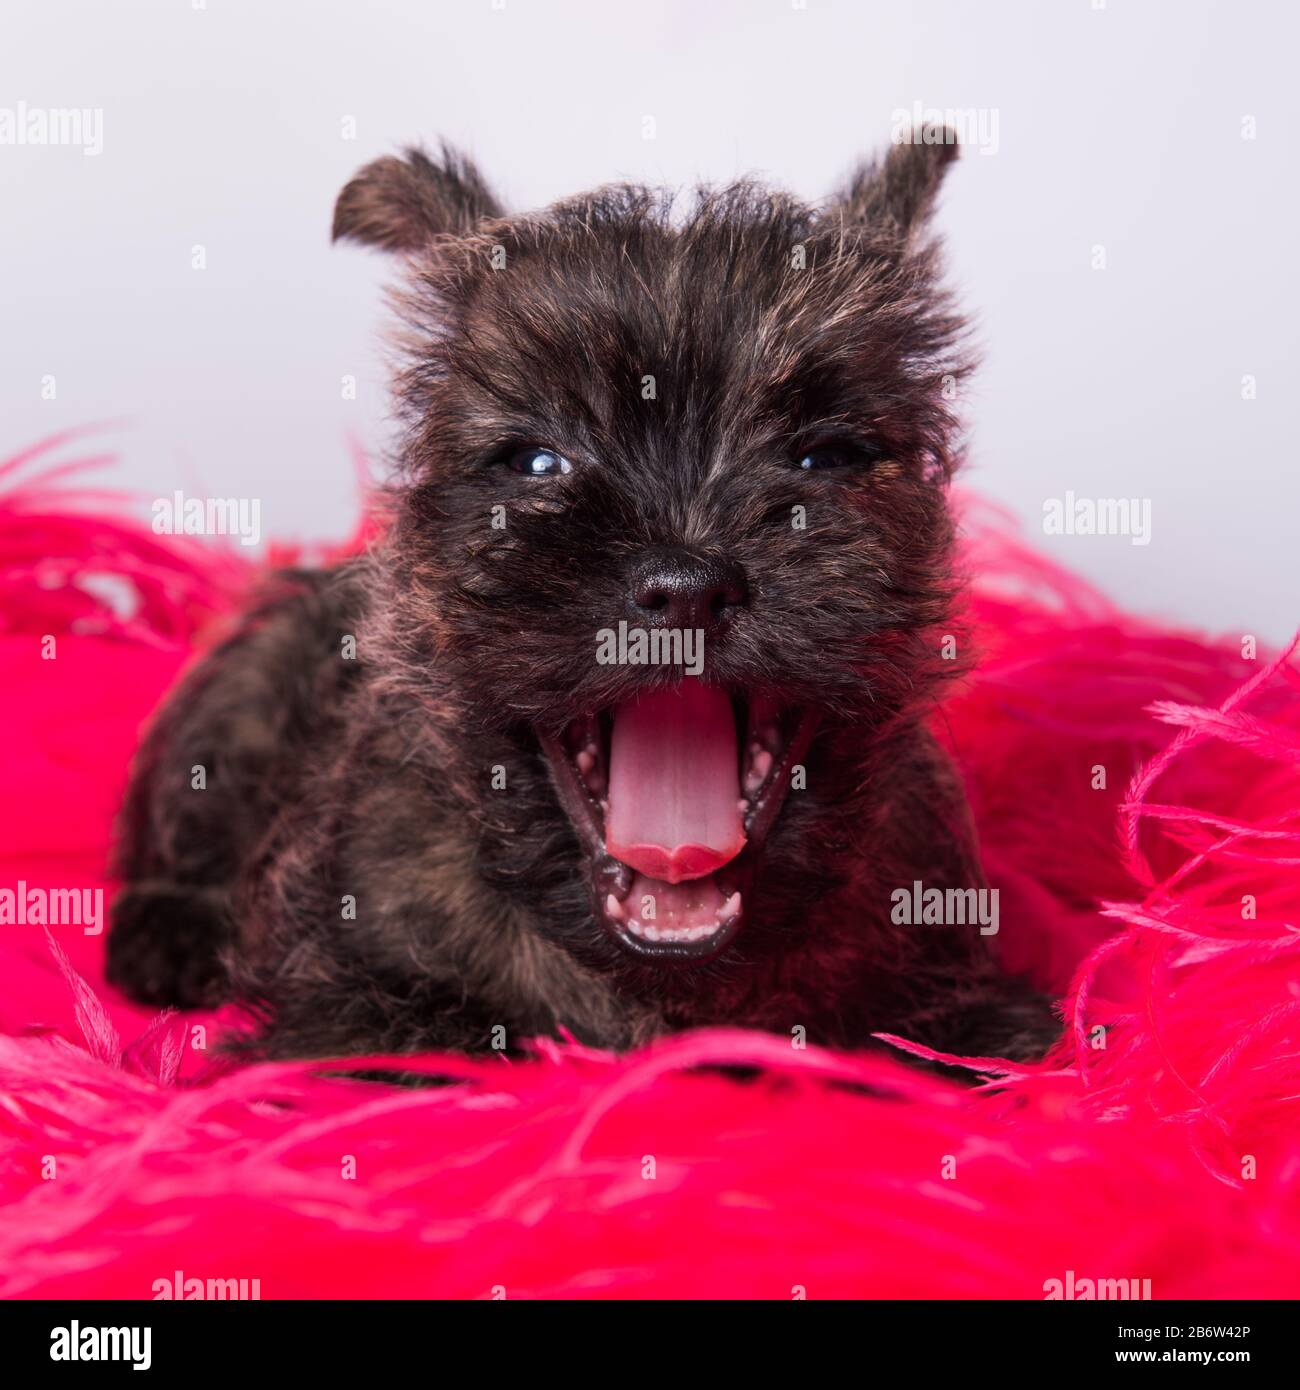 Cairn Terrier puppy dog is smiling or yawning. Stock Photo